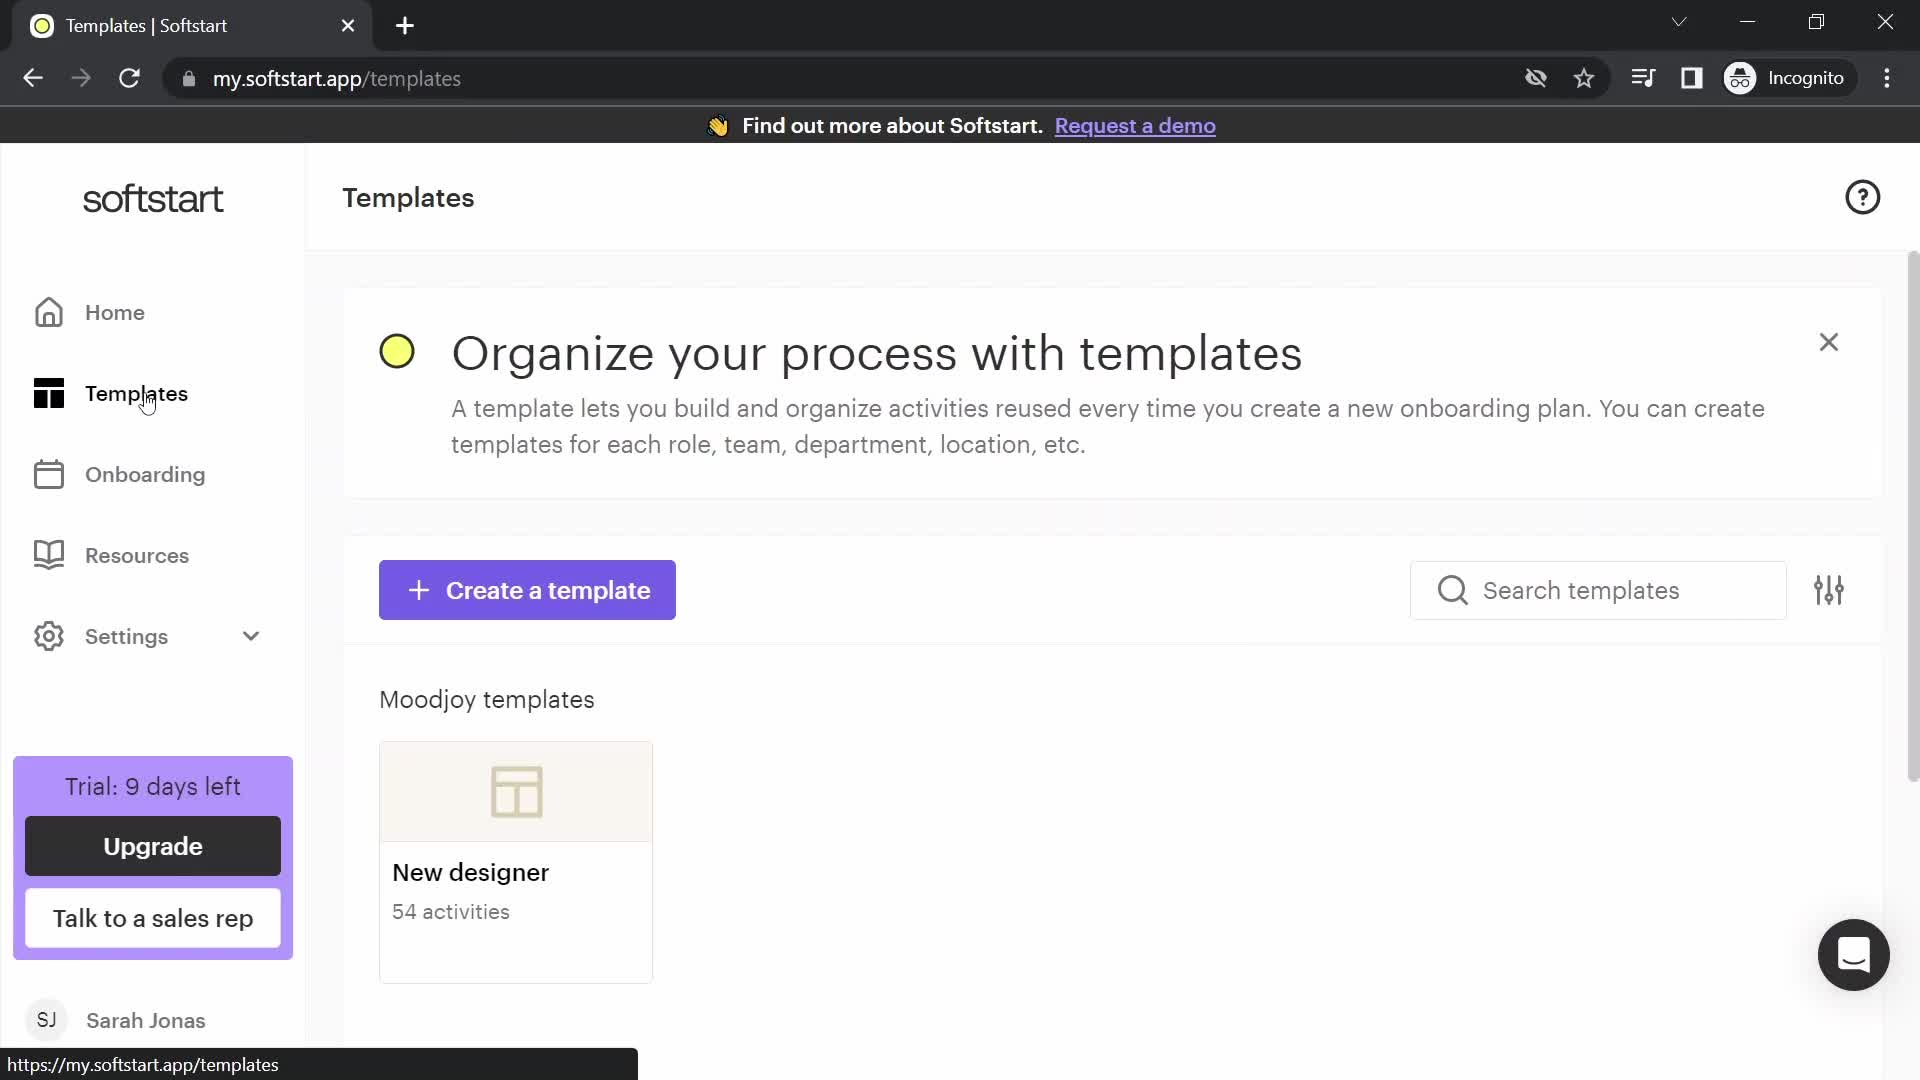 Screenshot of Templates on Creating a template on Softstart user flow